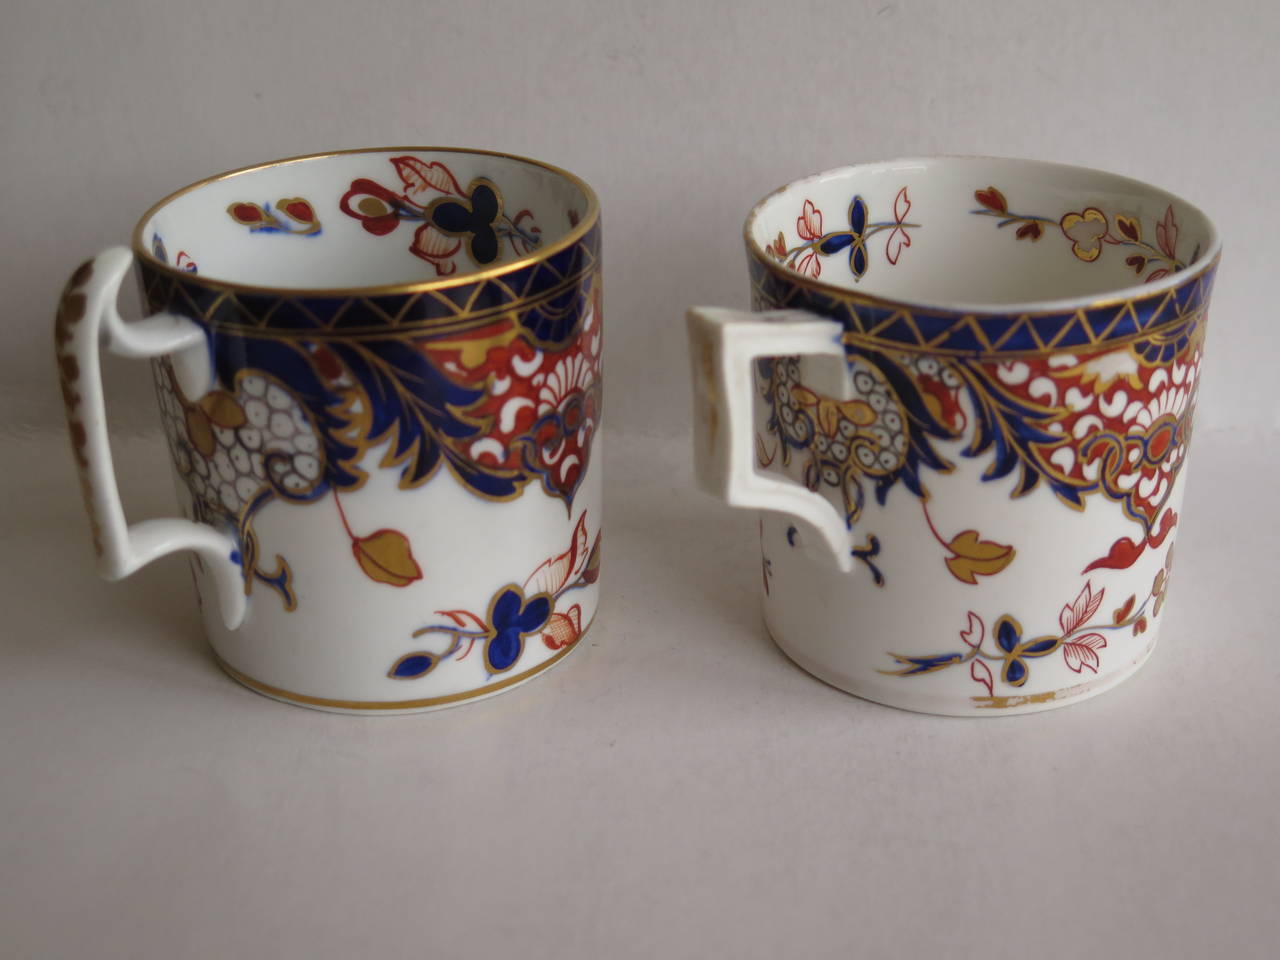 This is a finely painted, similar pair of porcelain coffee cans made by the Derby factory, England,  in the reign of George 111 in the early 19th century, circa 1810
 
Straight sided coffee cans were only made for about the first 20 years of the